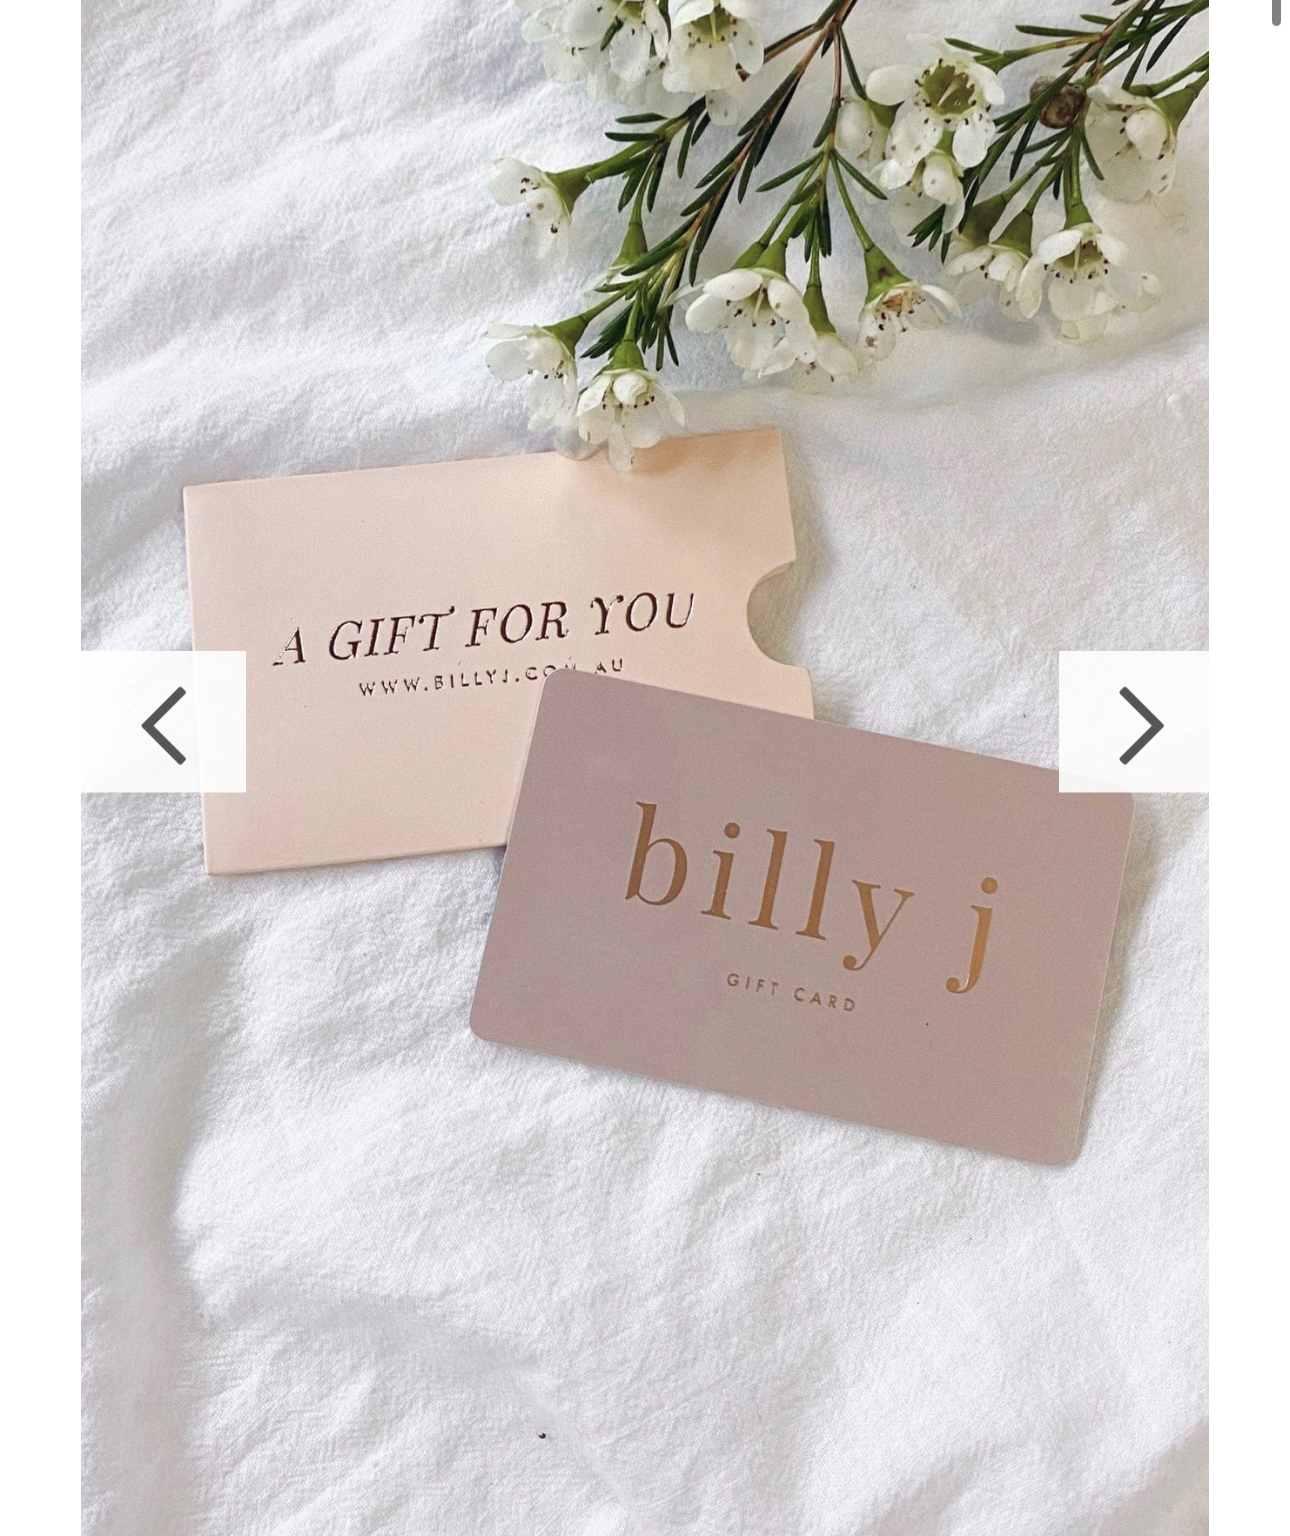 Billy J GiftCard